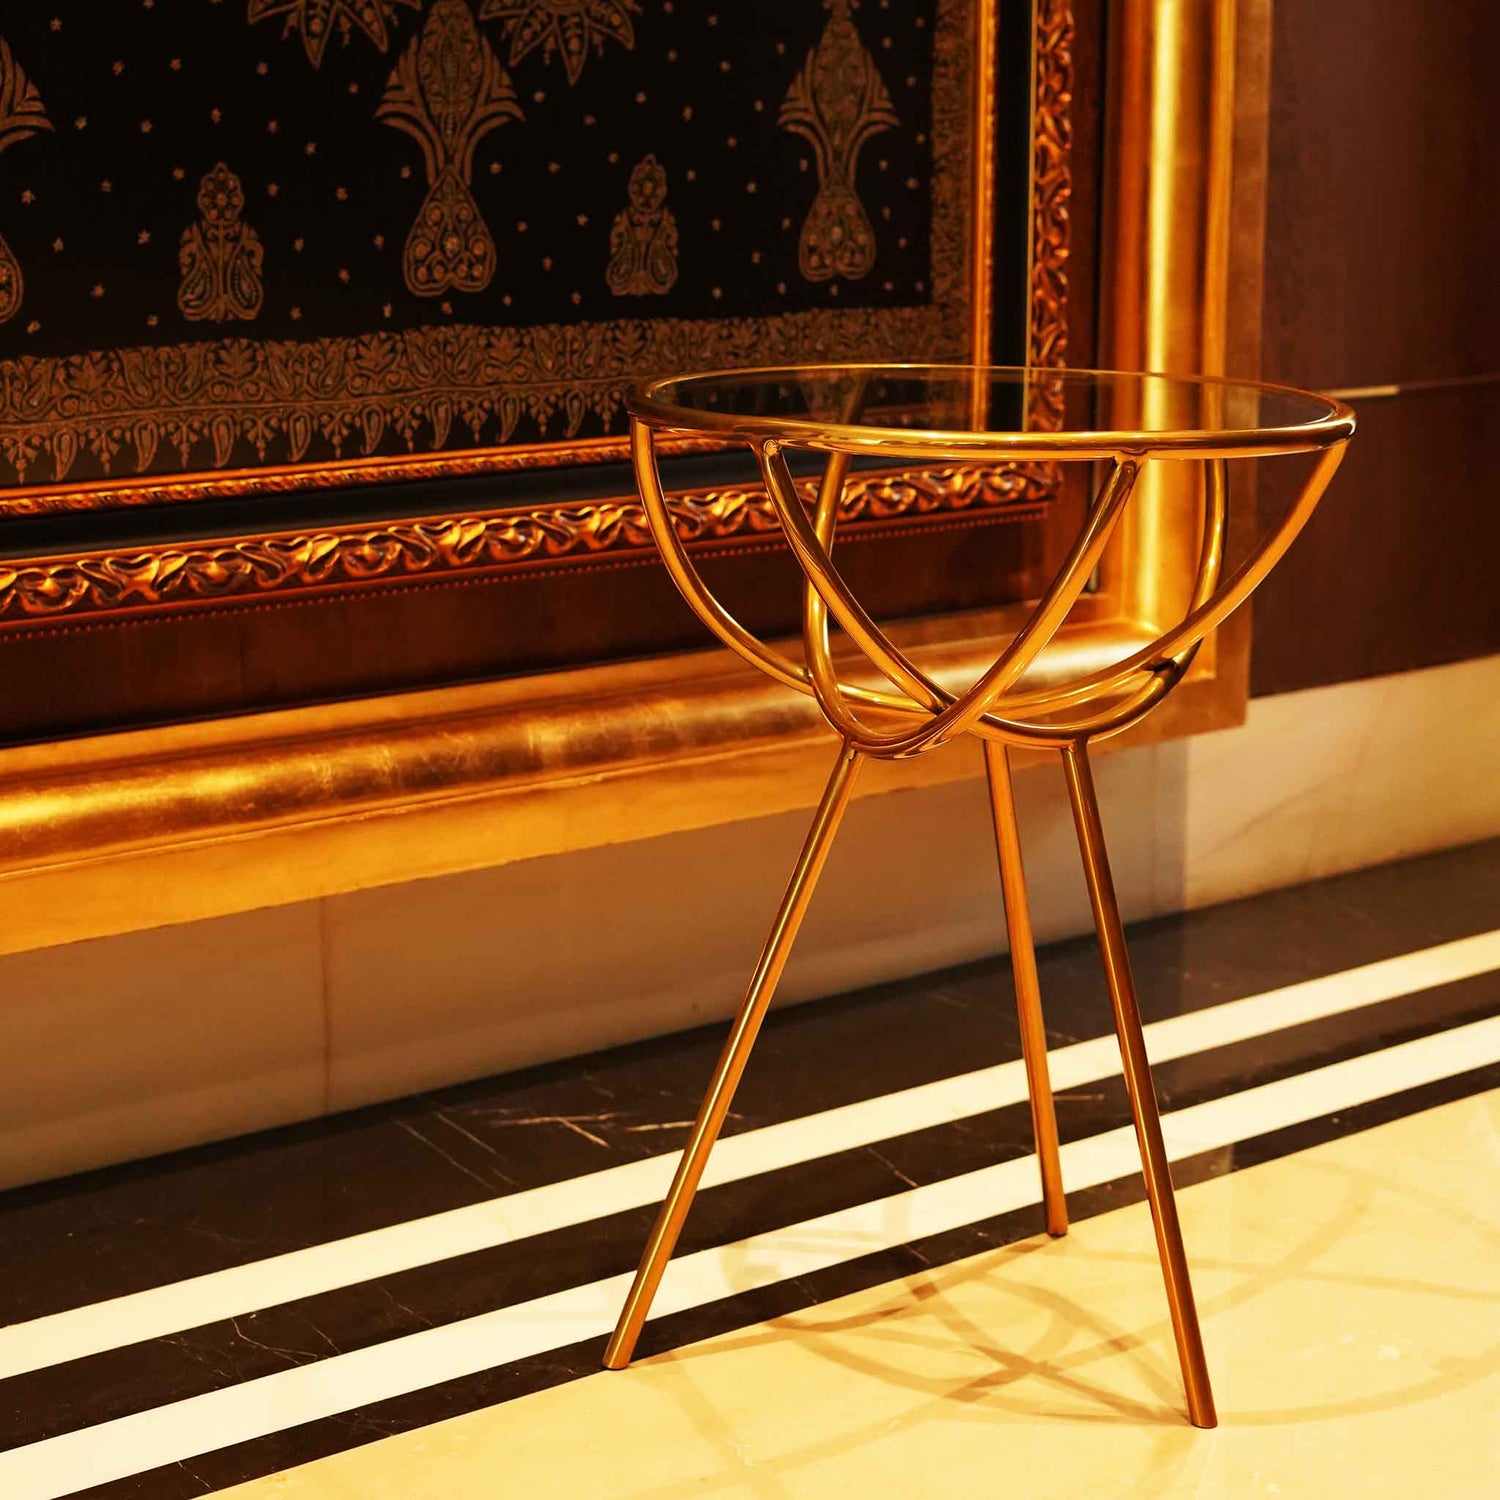 Close up view of a modern design golden colored metallic side table with a glass top in front of a large golden wall art.